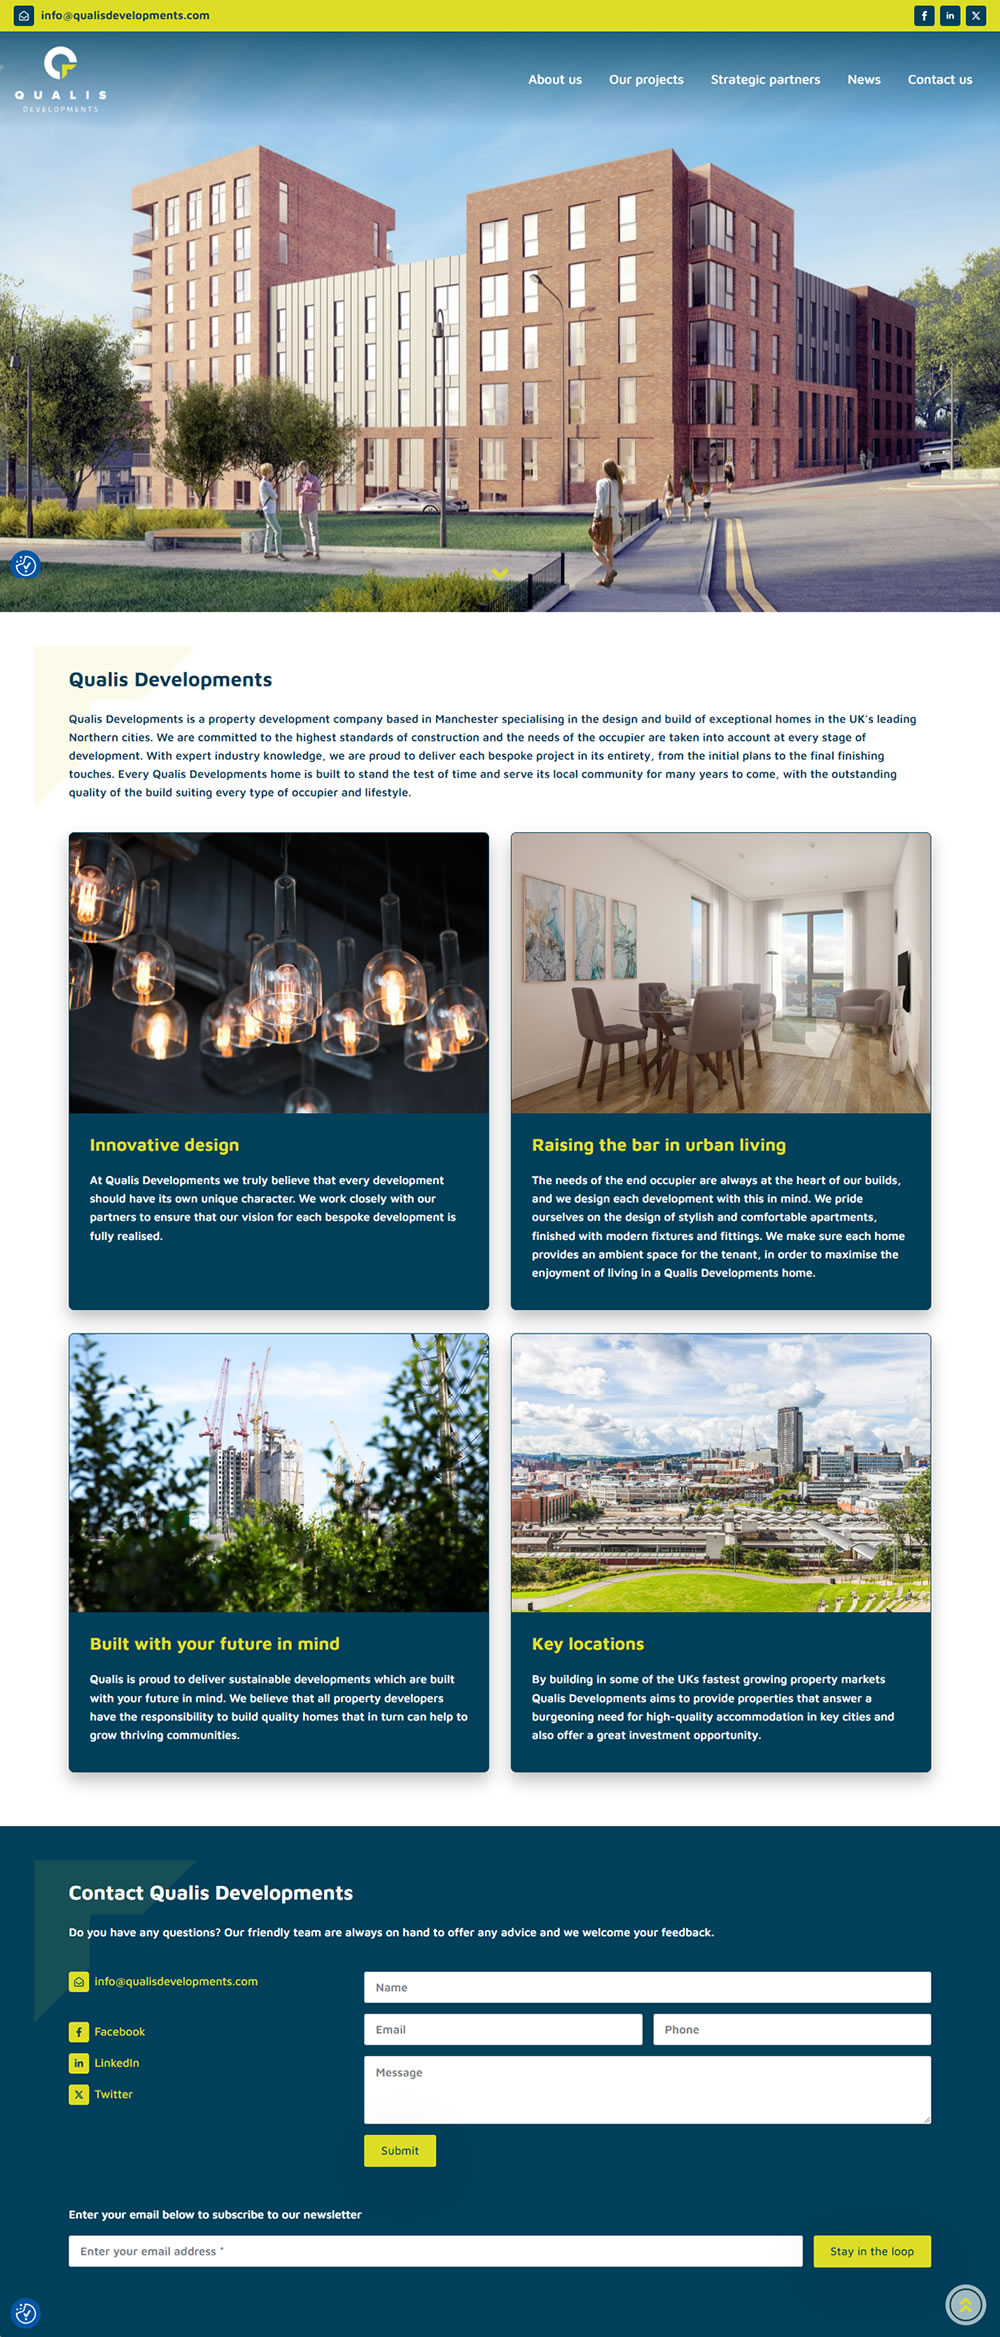 A new website for Qualis Developments